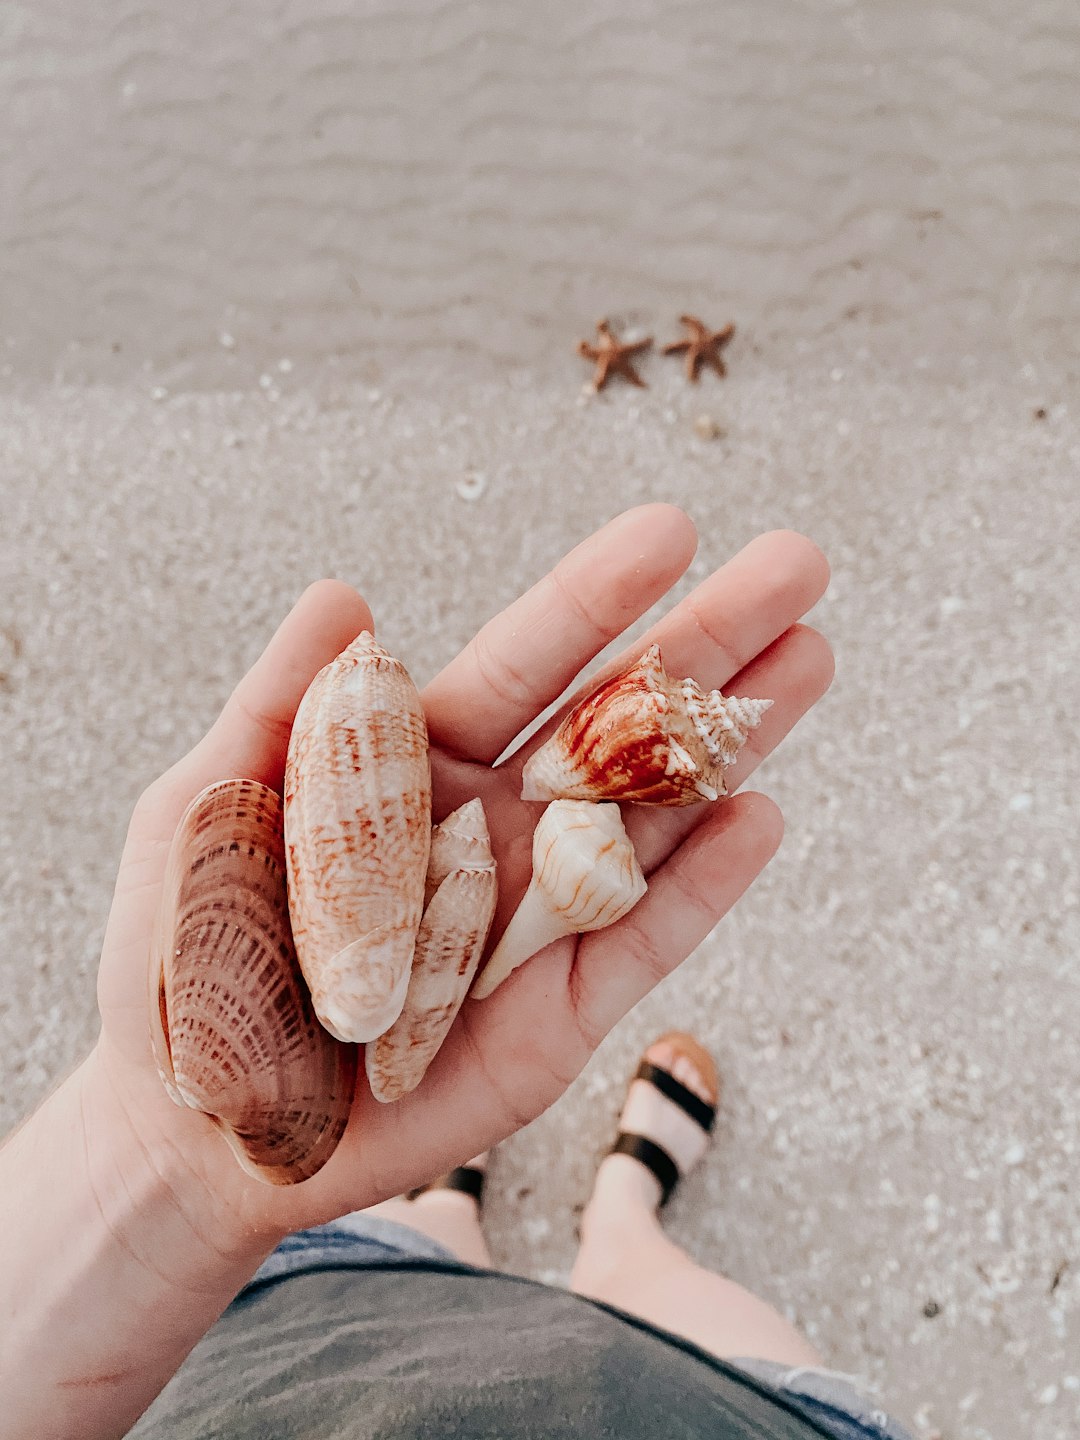 brown and white seashell on white sand during daytime